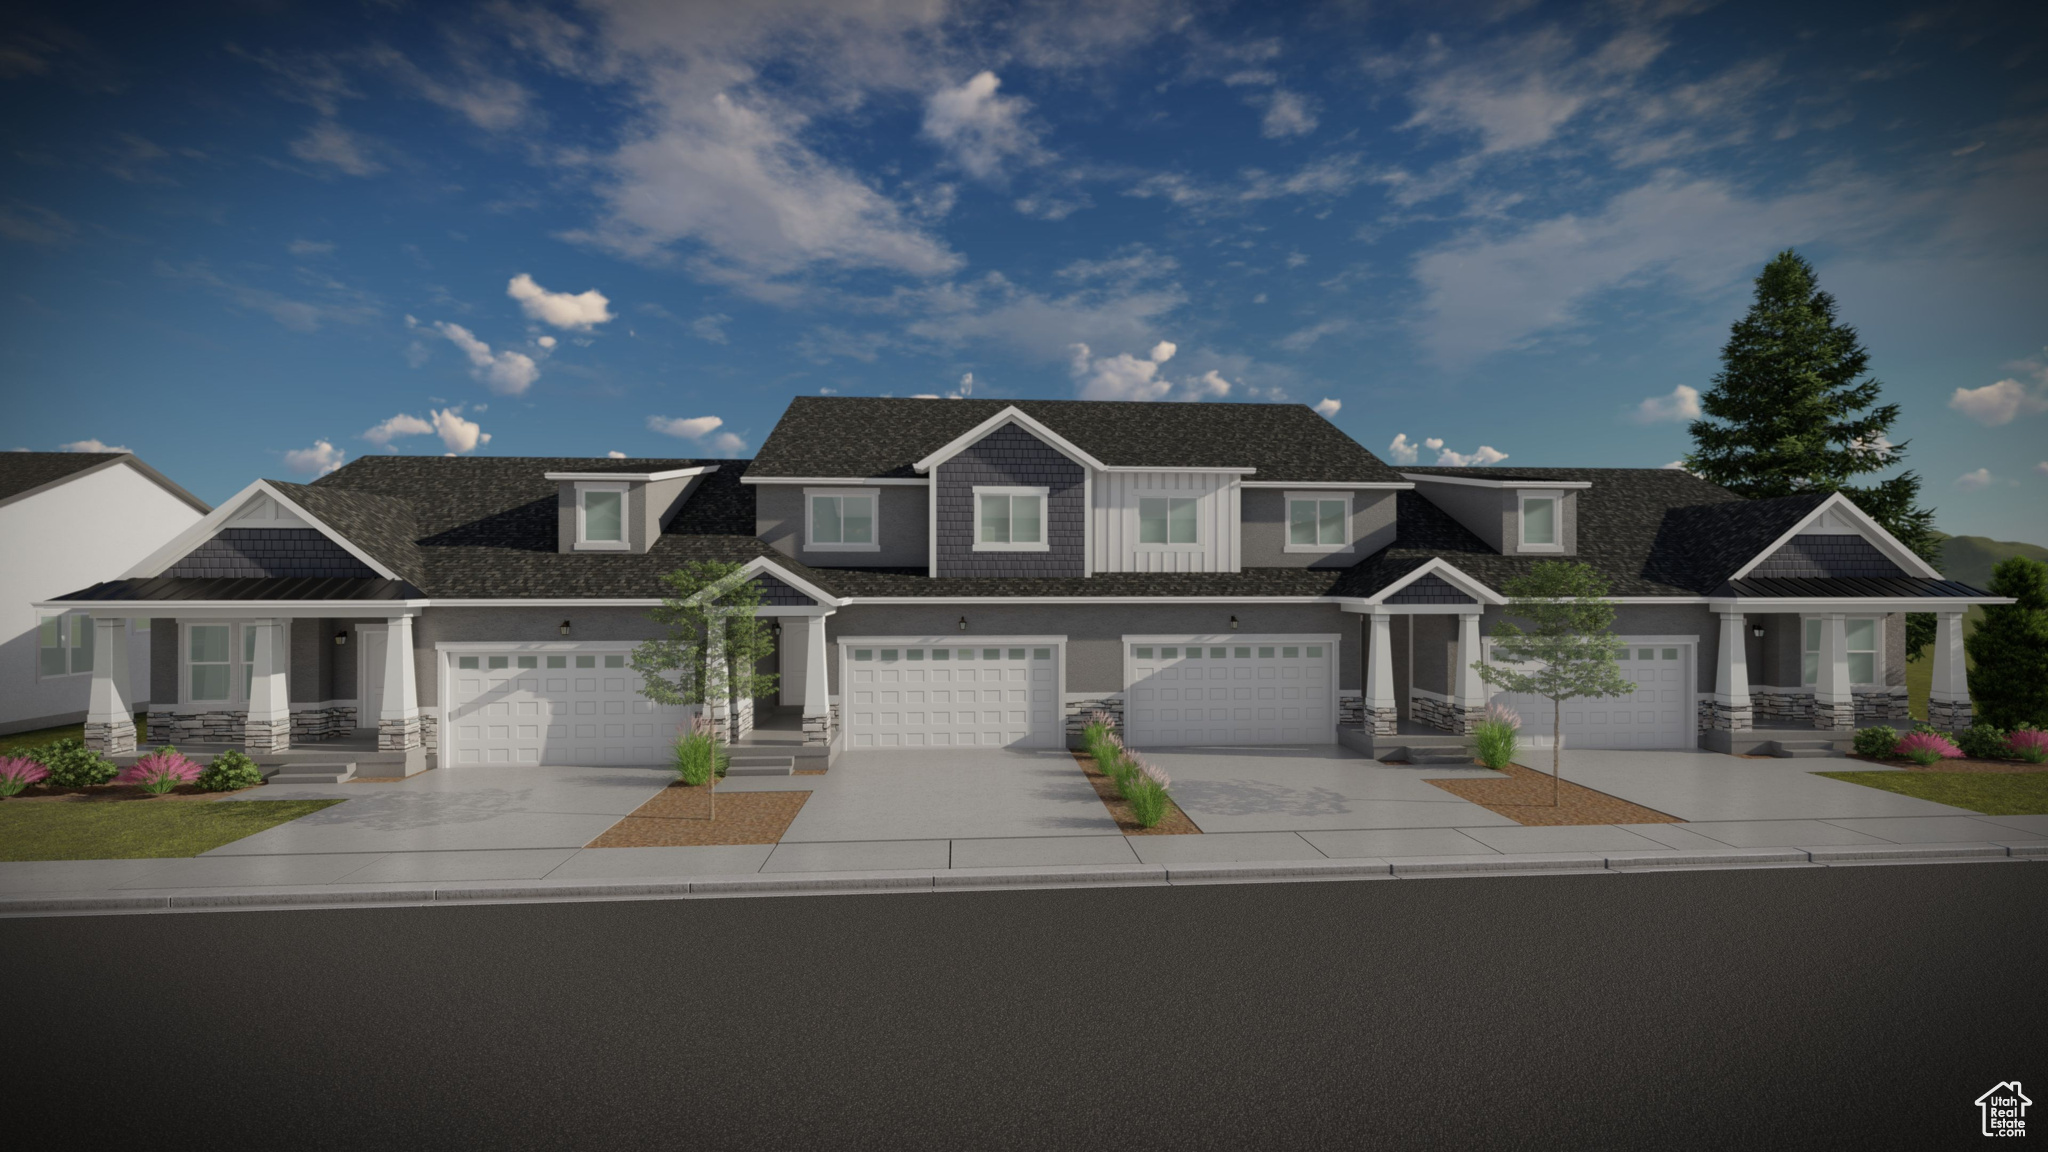 Craftsman inspired home with a garage